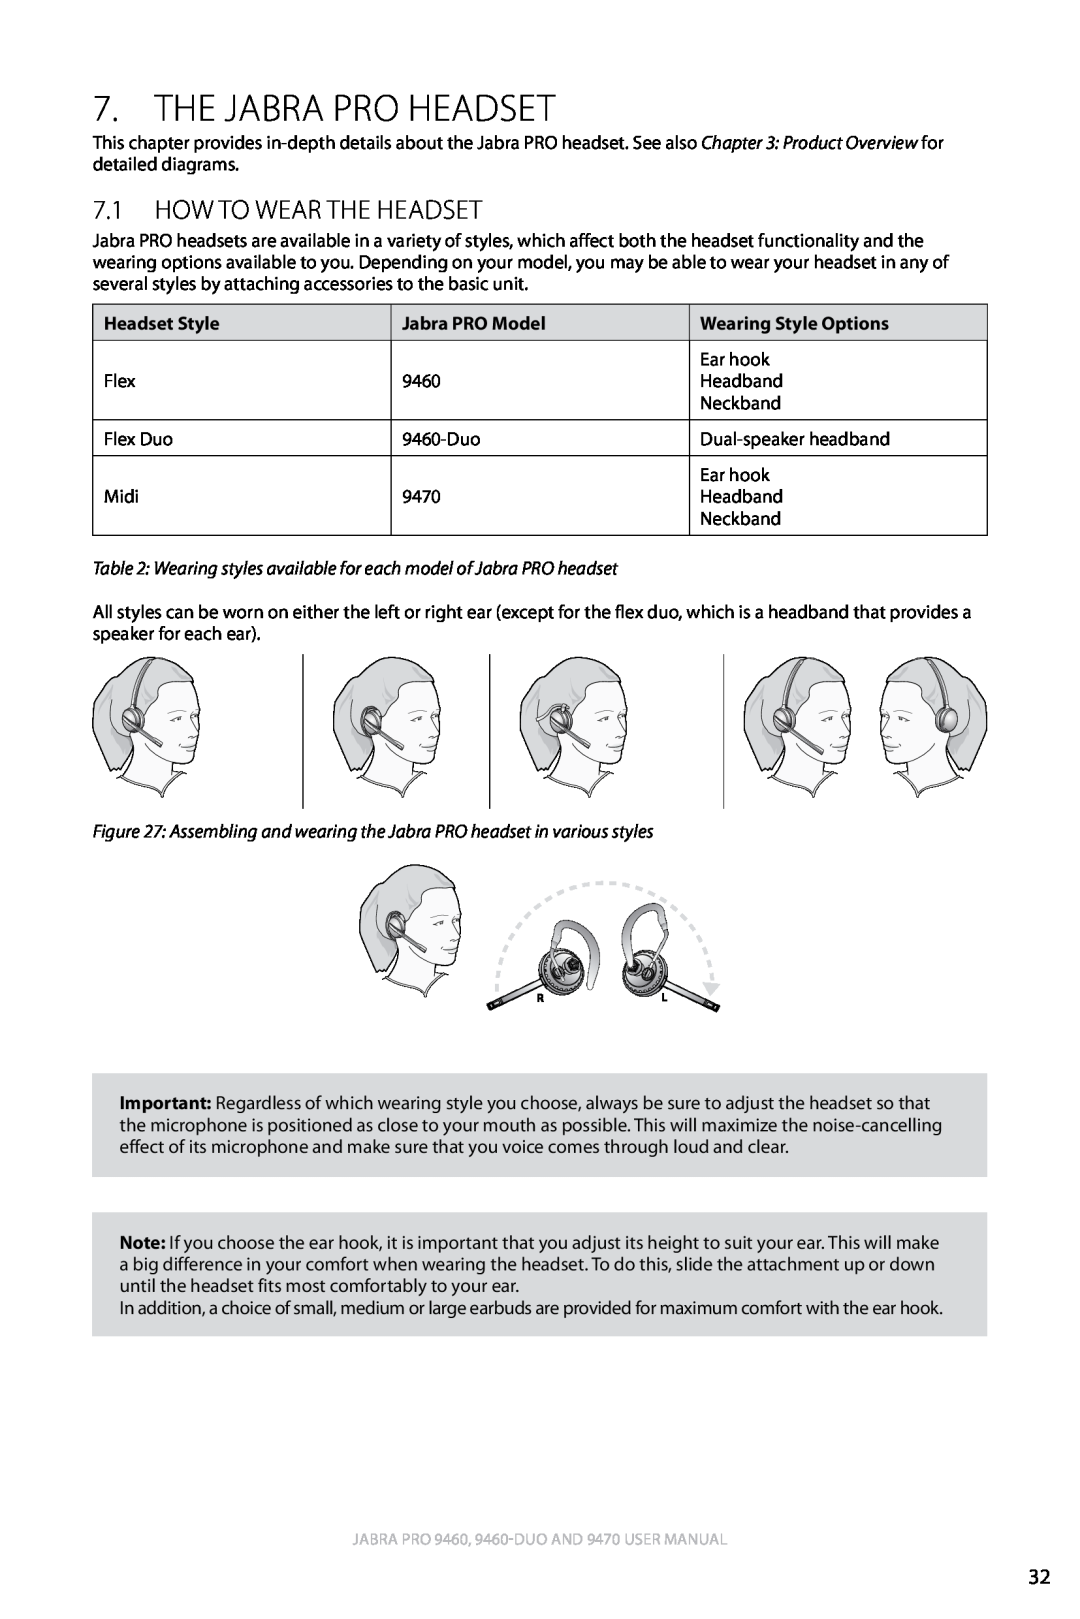 Lennox Hearth 9470 user manual The Jabra PRO Headset, 7.1How to Wear the Headset, english 